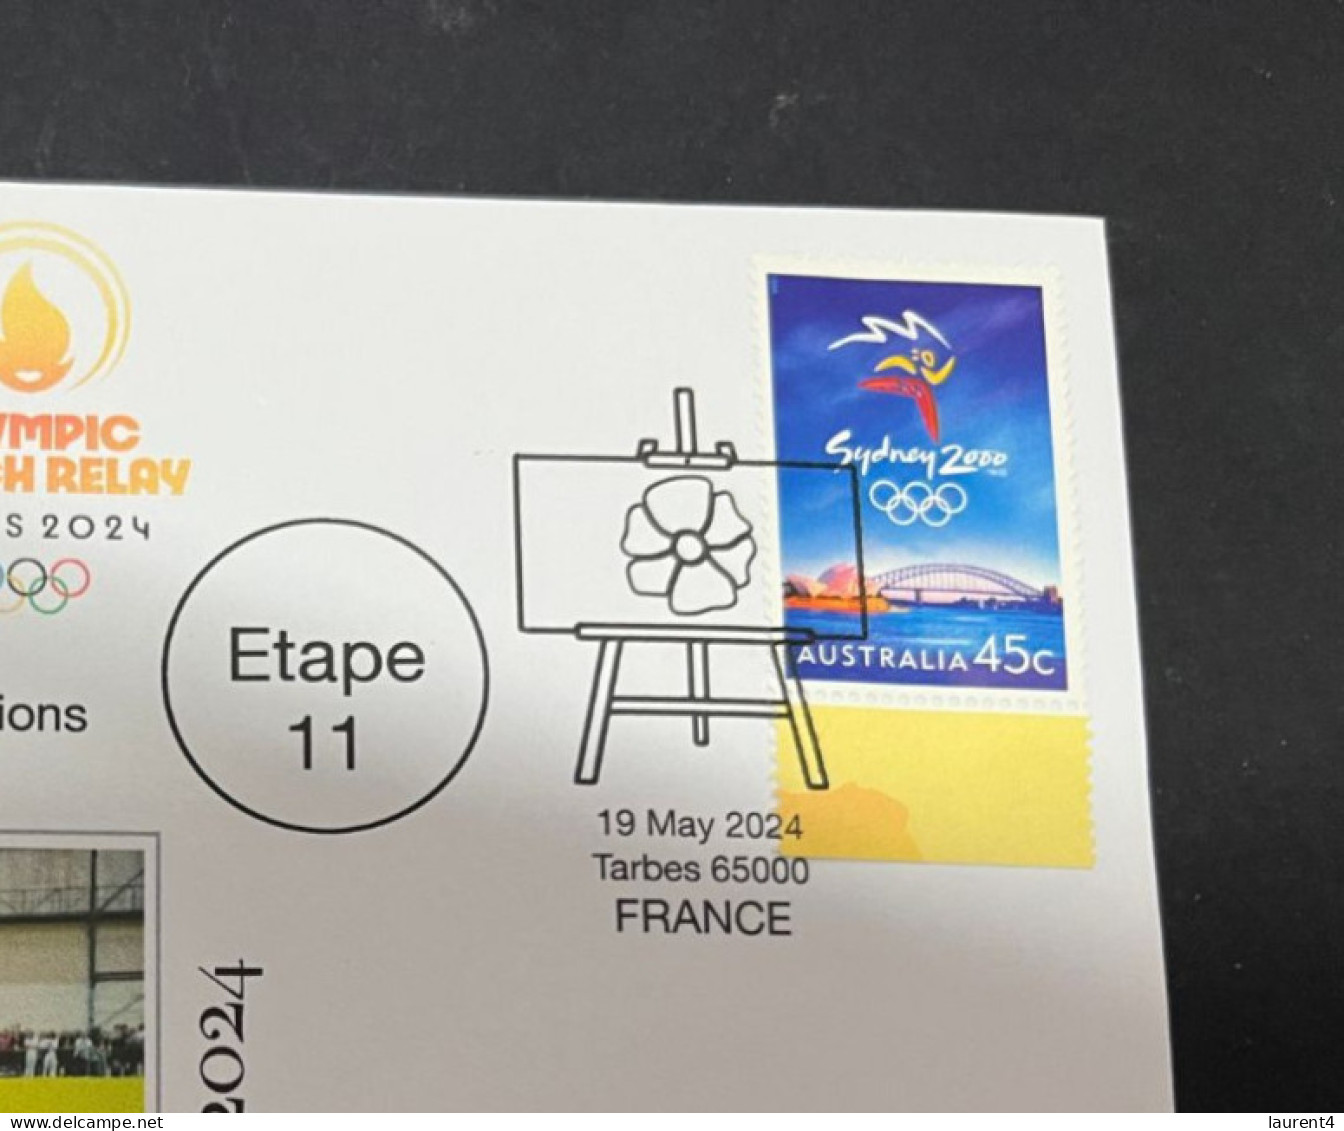 20-5-2024 (5 Z 37) Paris Olympic Games 2024 - Torch Relay (Etape 11) In Tarbes (19-5-2024) With OLYMPIC Stamp - Sommer 2024: Paris